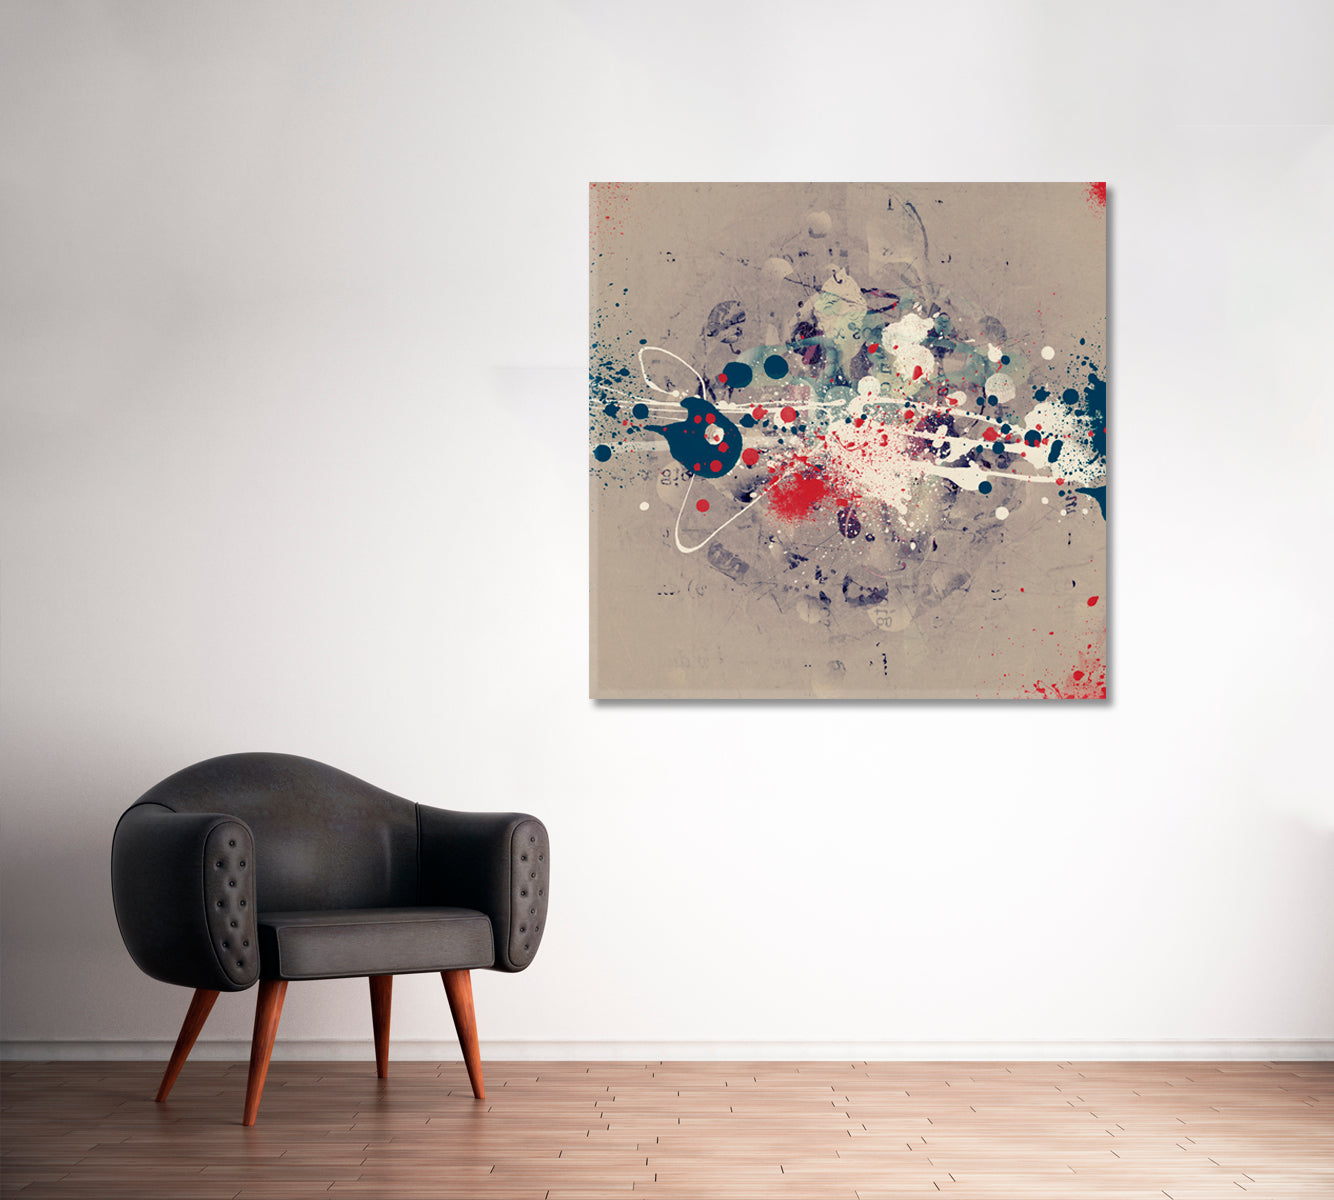 Abstract Paint Splashes Canvas Print ArtLexy 1 Panel 12"x12" inches 